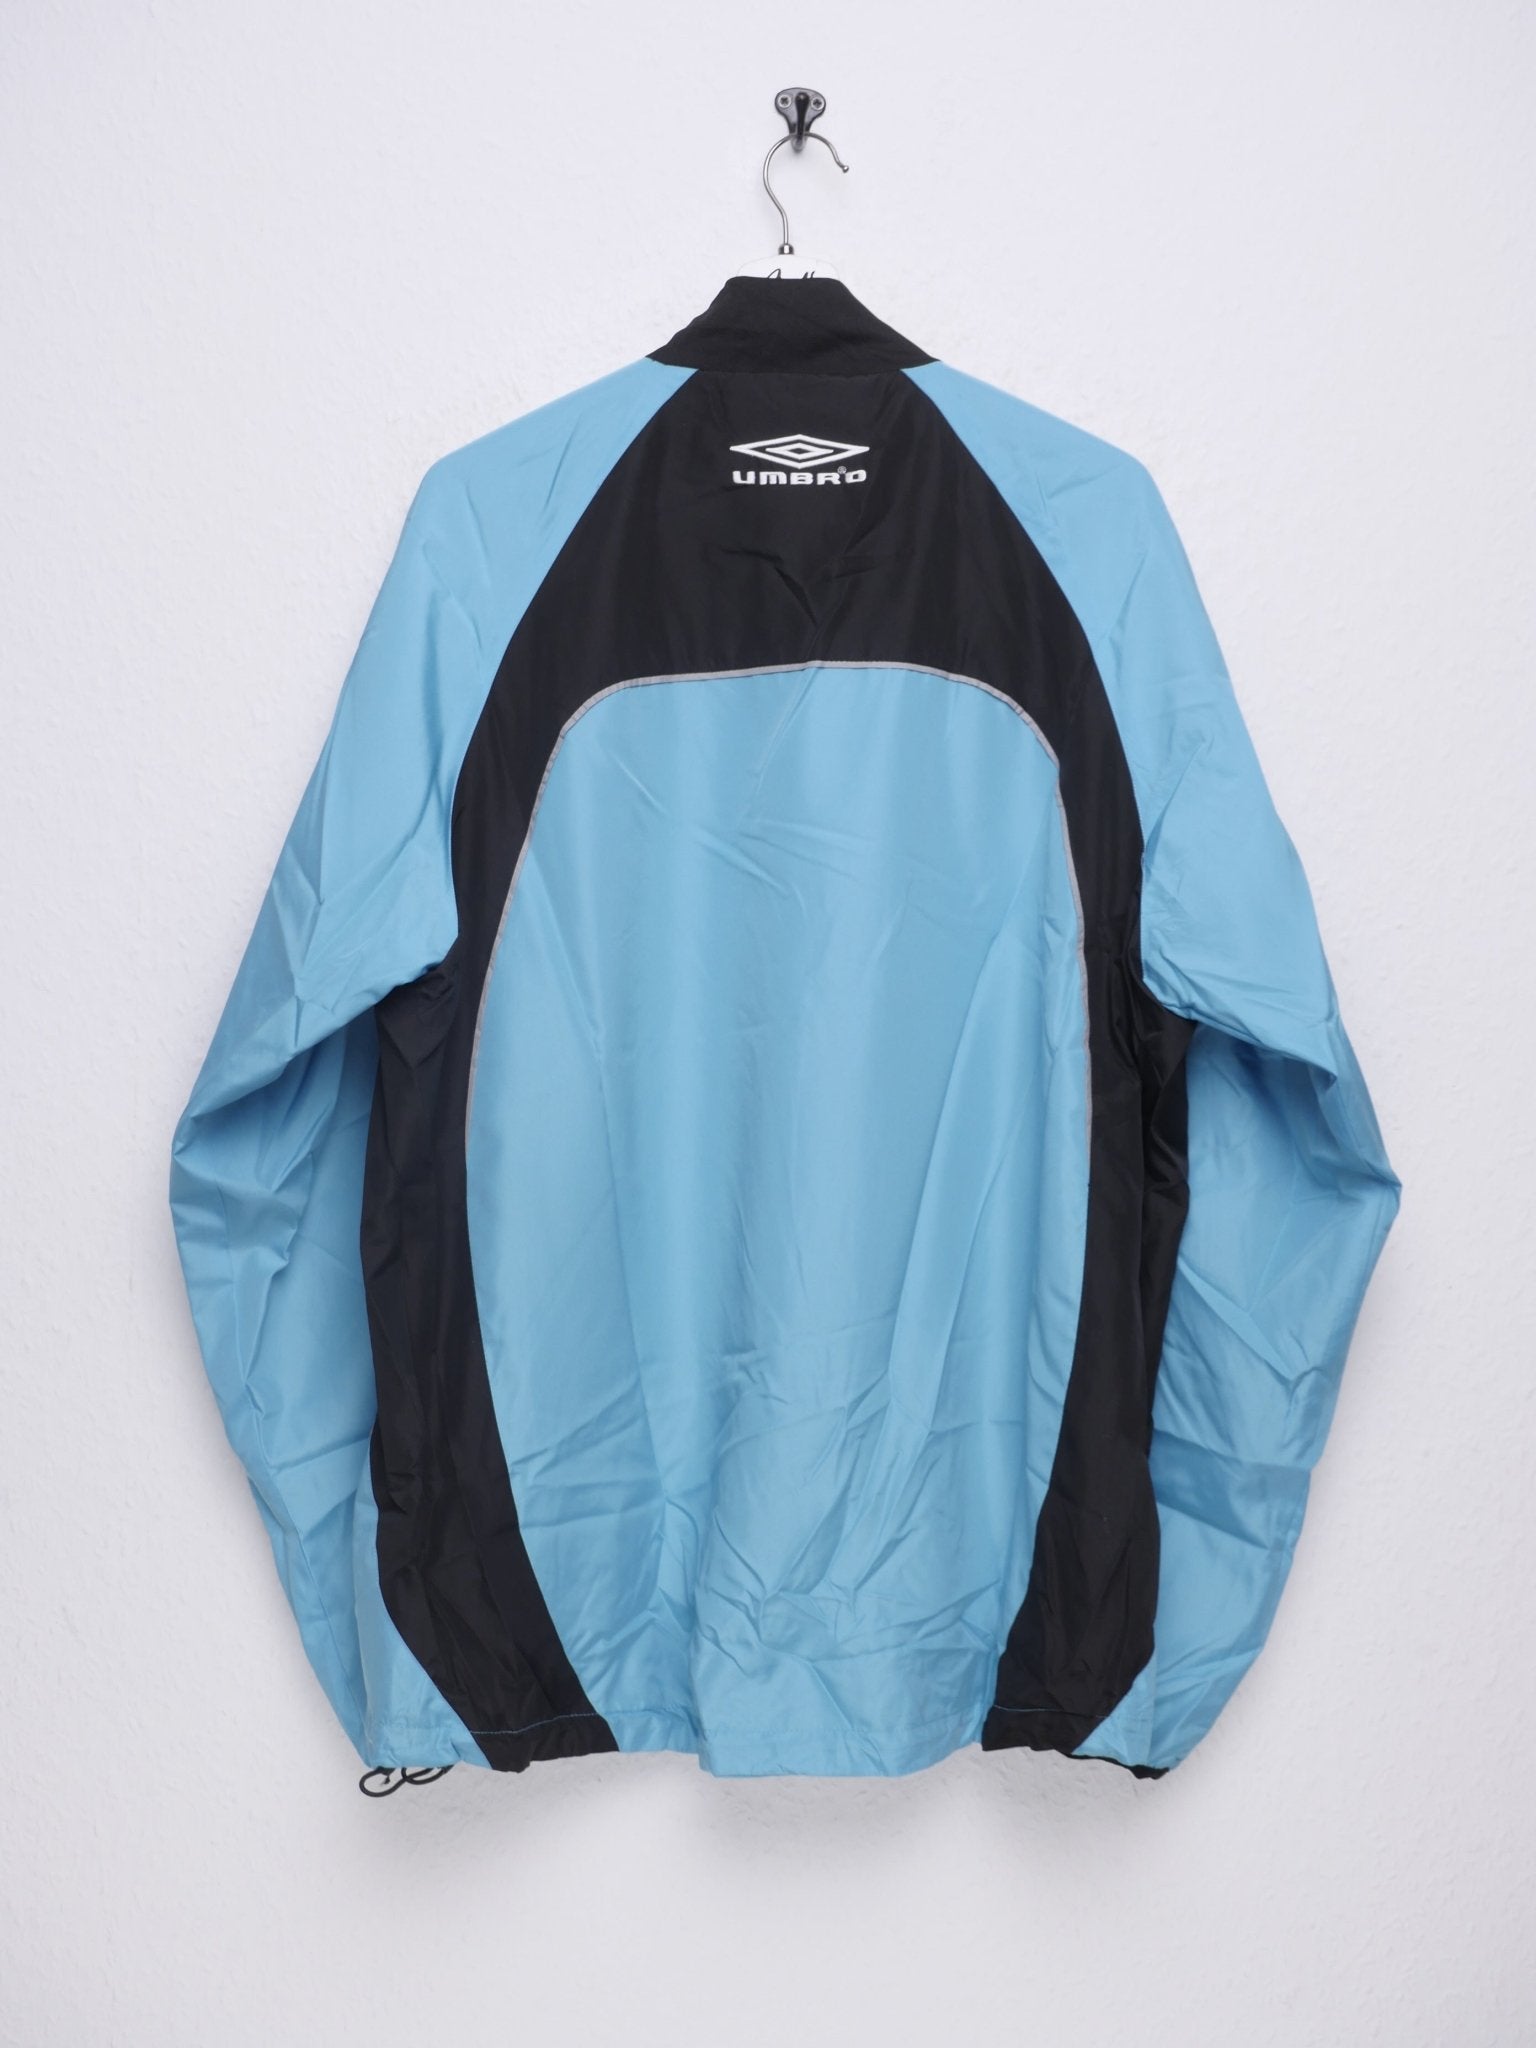 Umbro embroidered Logo Vintage Jersey Sweater - Peeces